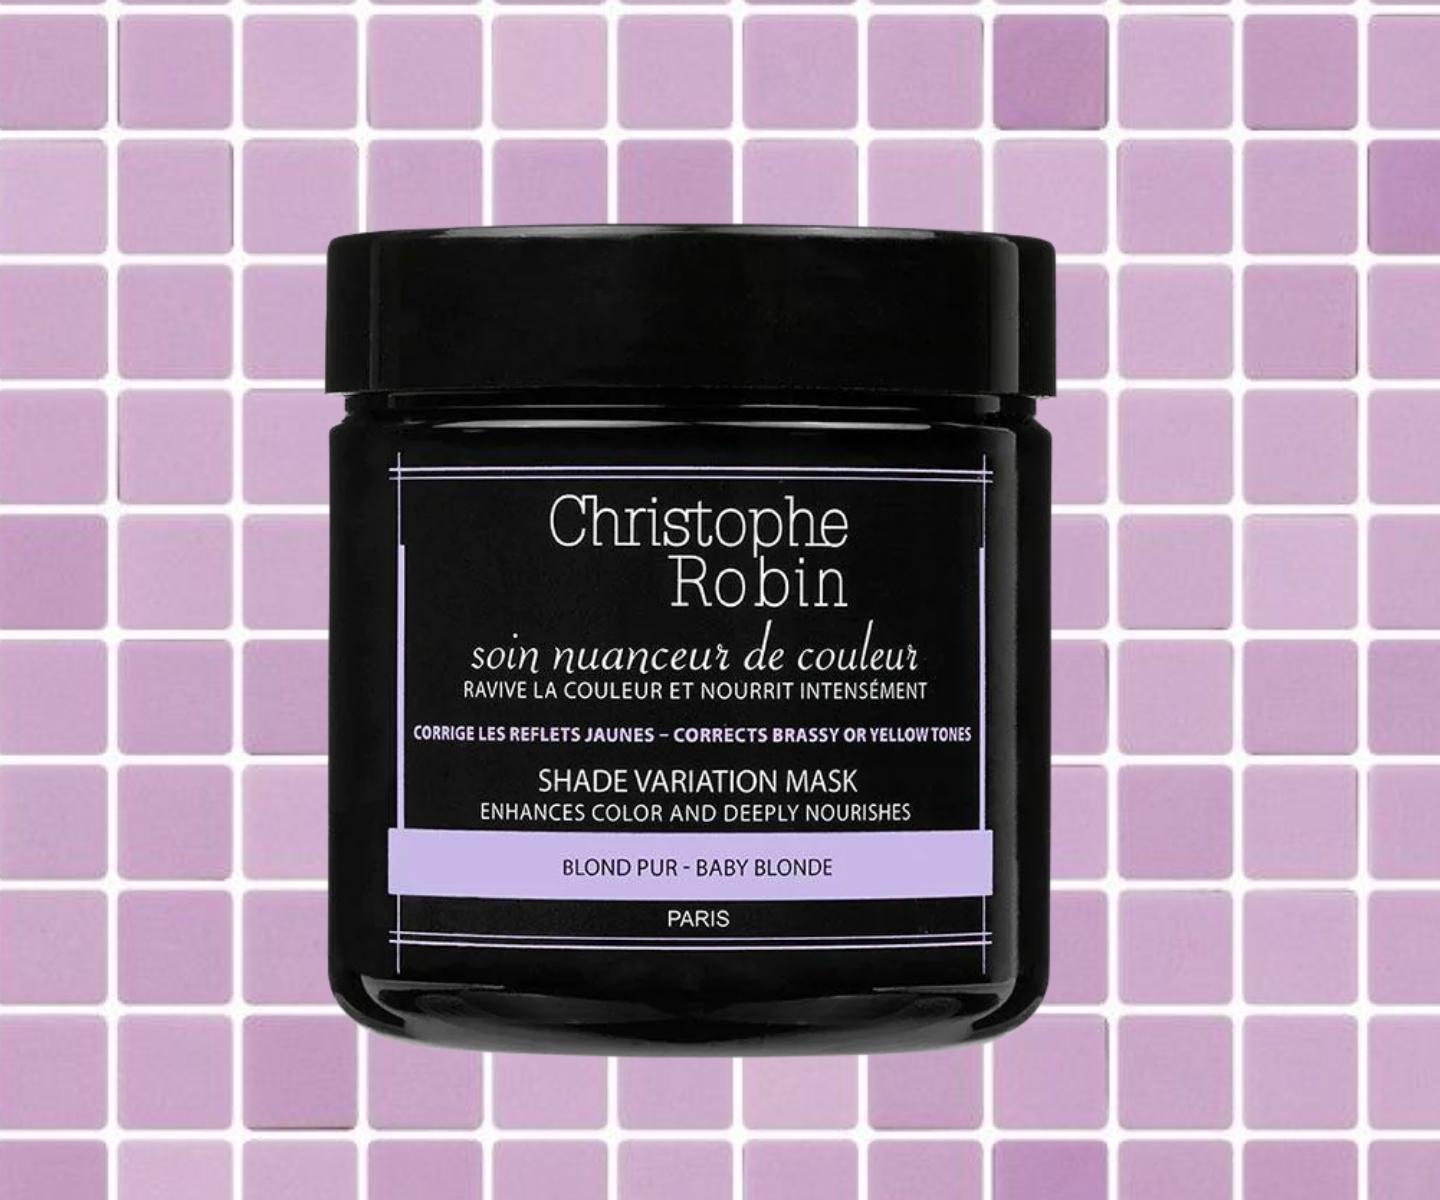 Christophe Robin Shade Variation Care - Baby Blond